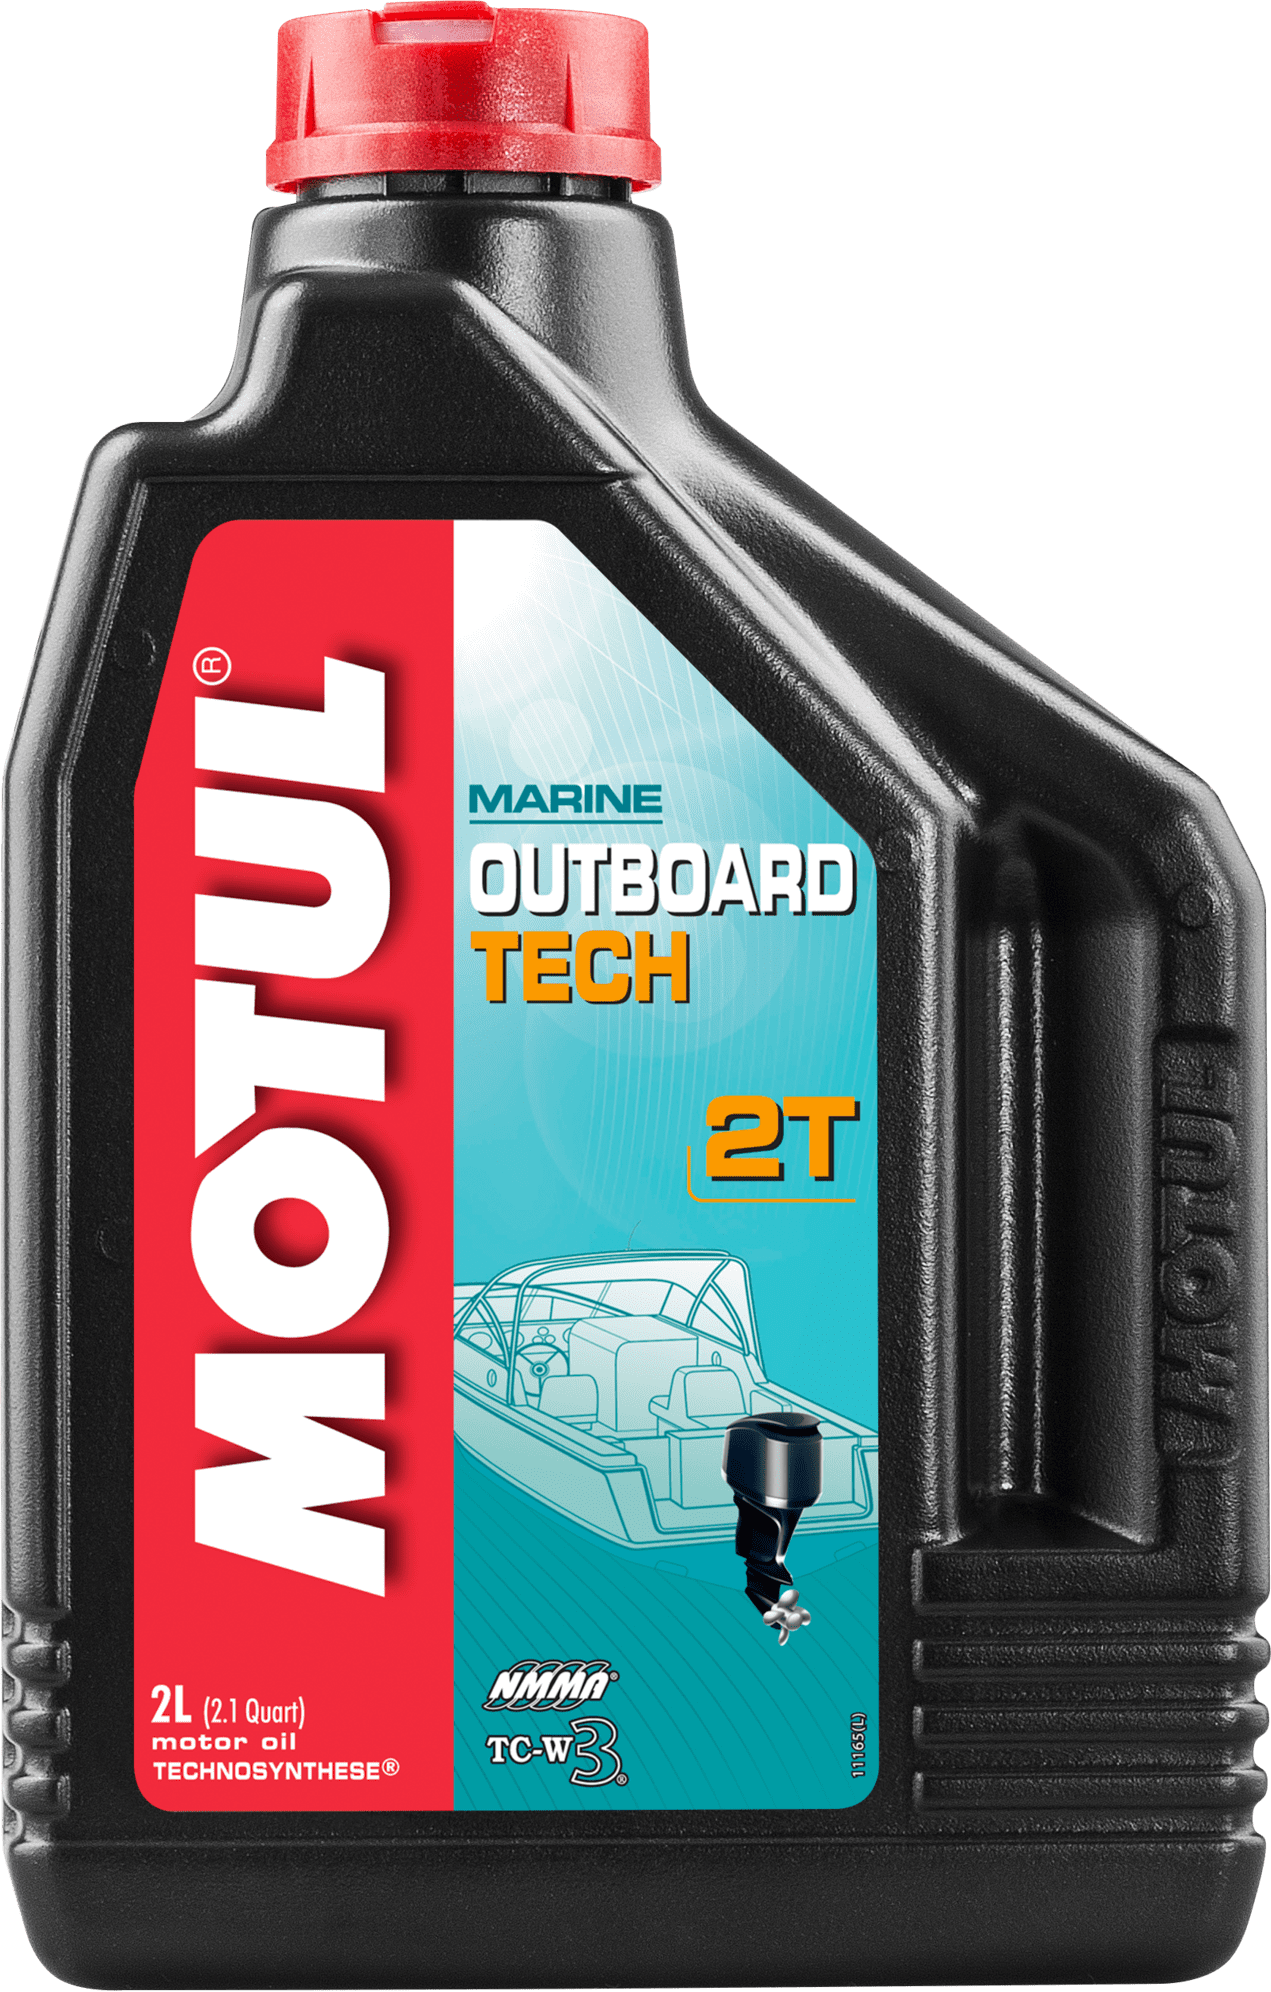 101726-2 Technosynthese® lubricant for 2-Stroke outboard and jet ski engines with premix or injector lube system, operating at high rpm.